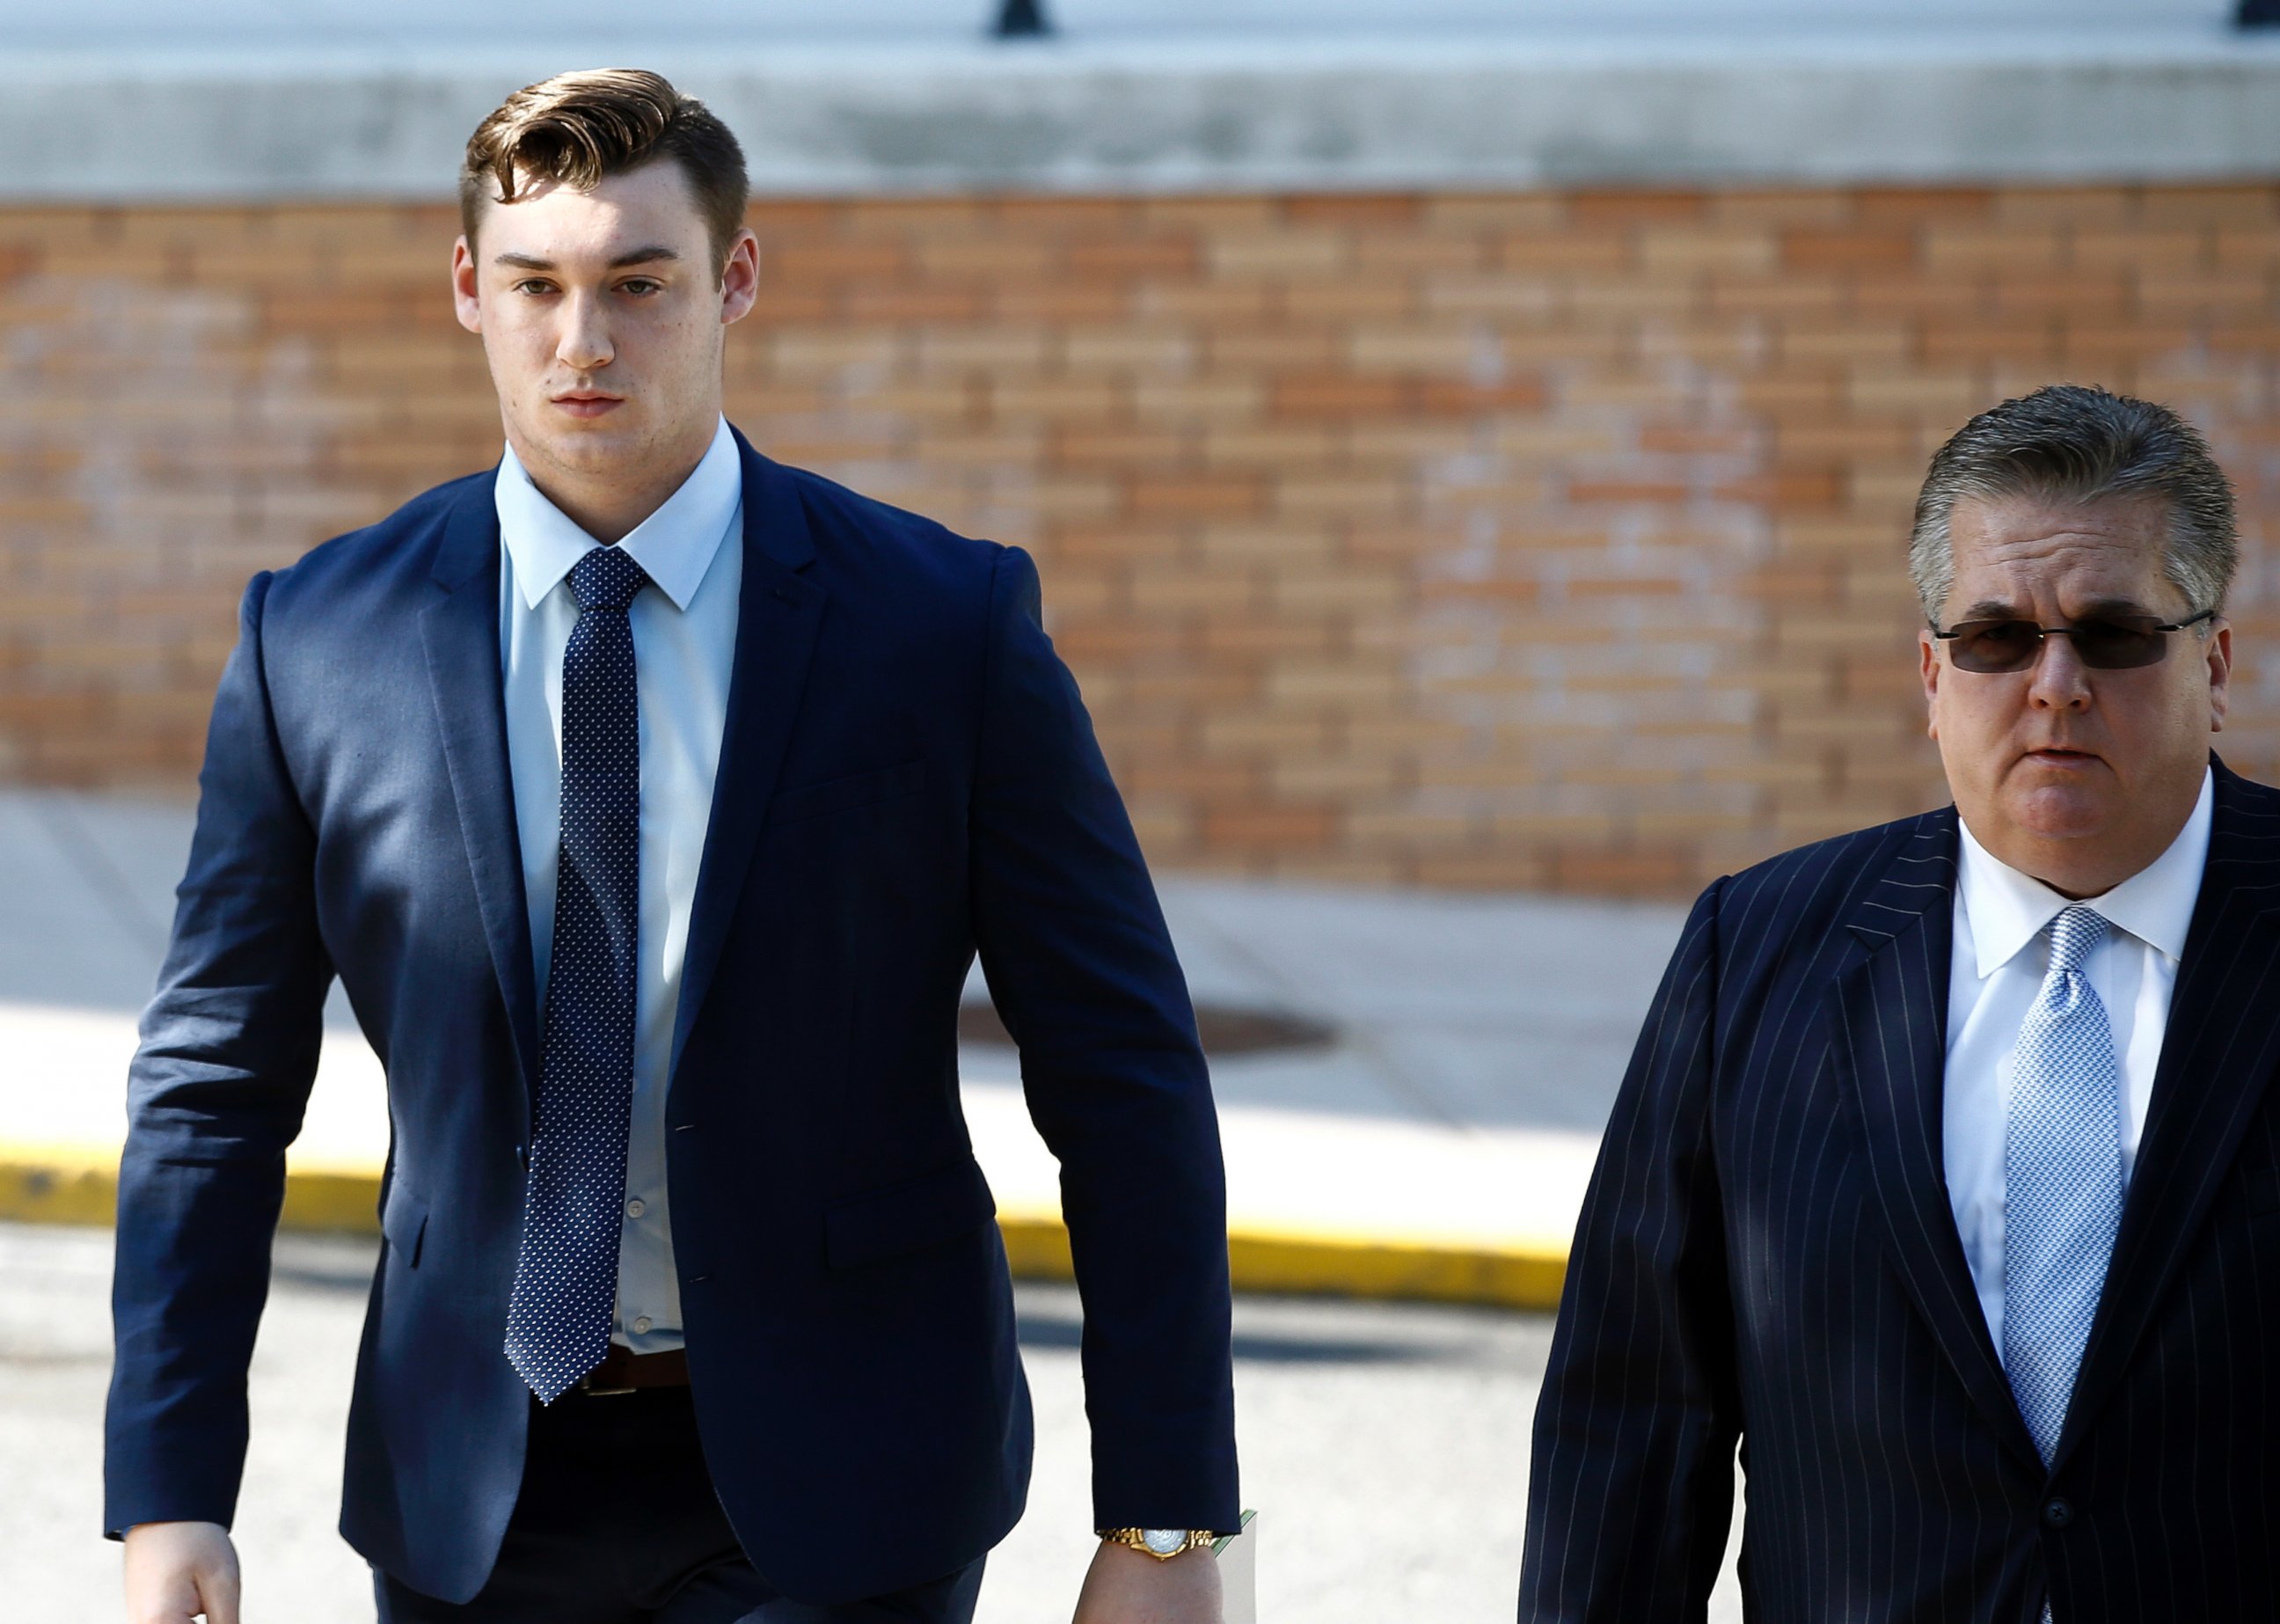 PHOTO: Joseph Ems arrives for his preliminary hearing on charges related to the hazing death of Timothy Piazza at Penn State's Beta Theta Pi fraternity at the Centre County Courthouse in Bellefonte, Pa., June 12, 2017.